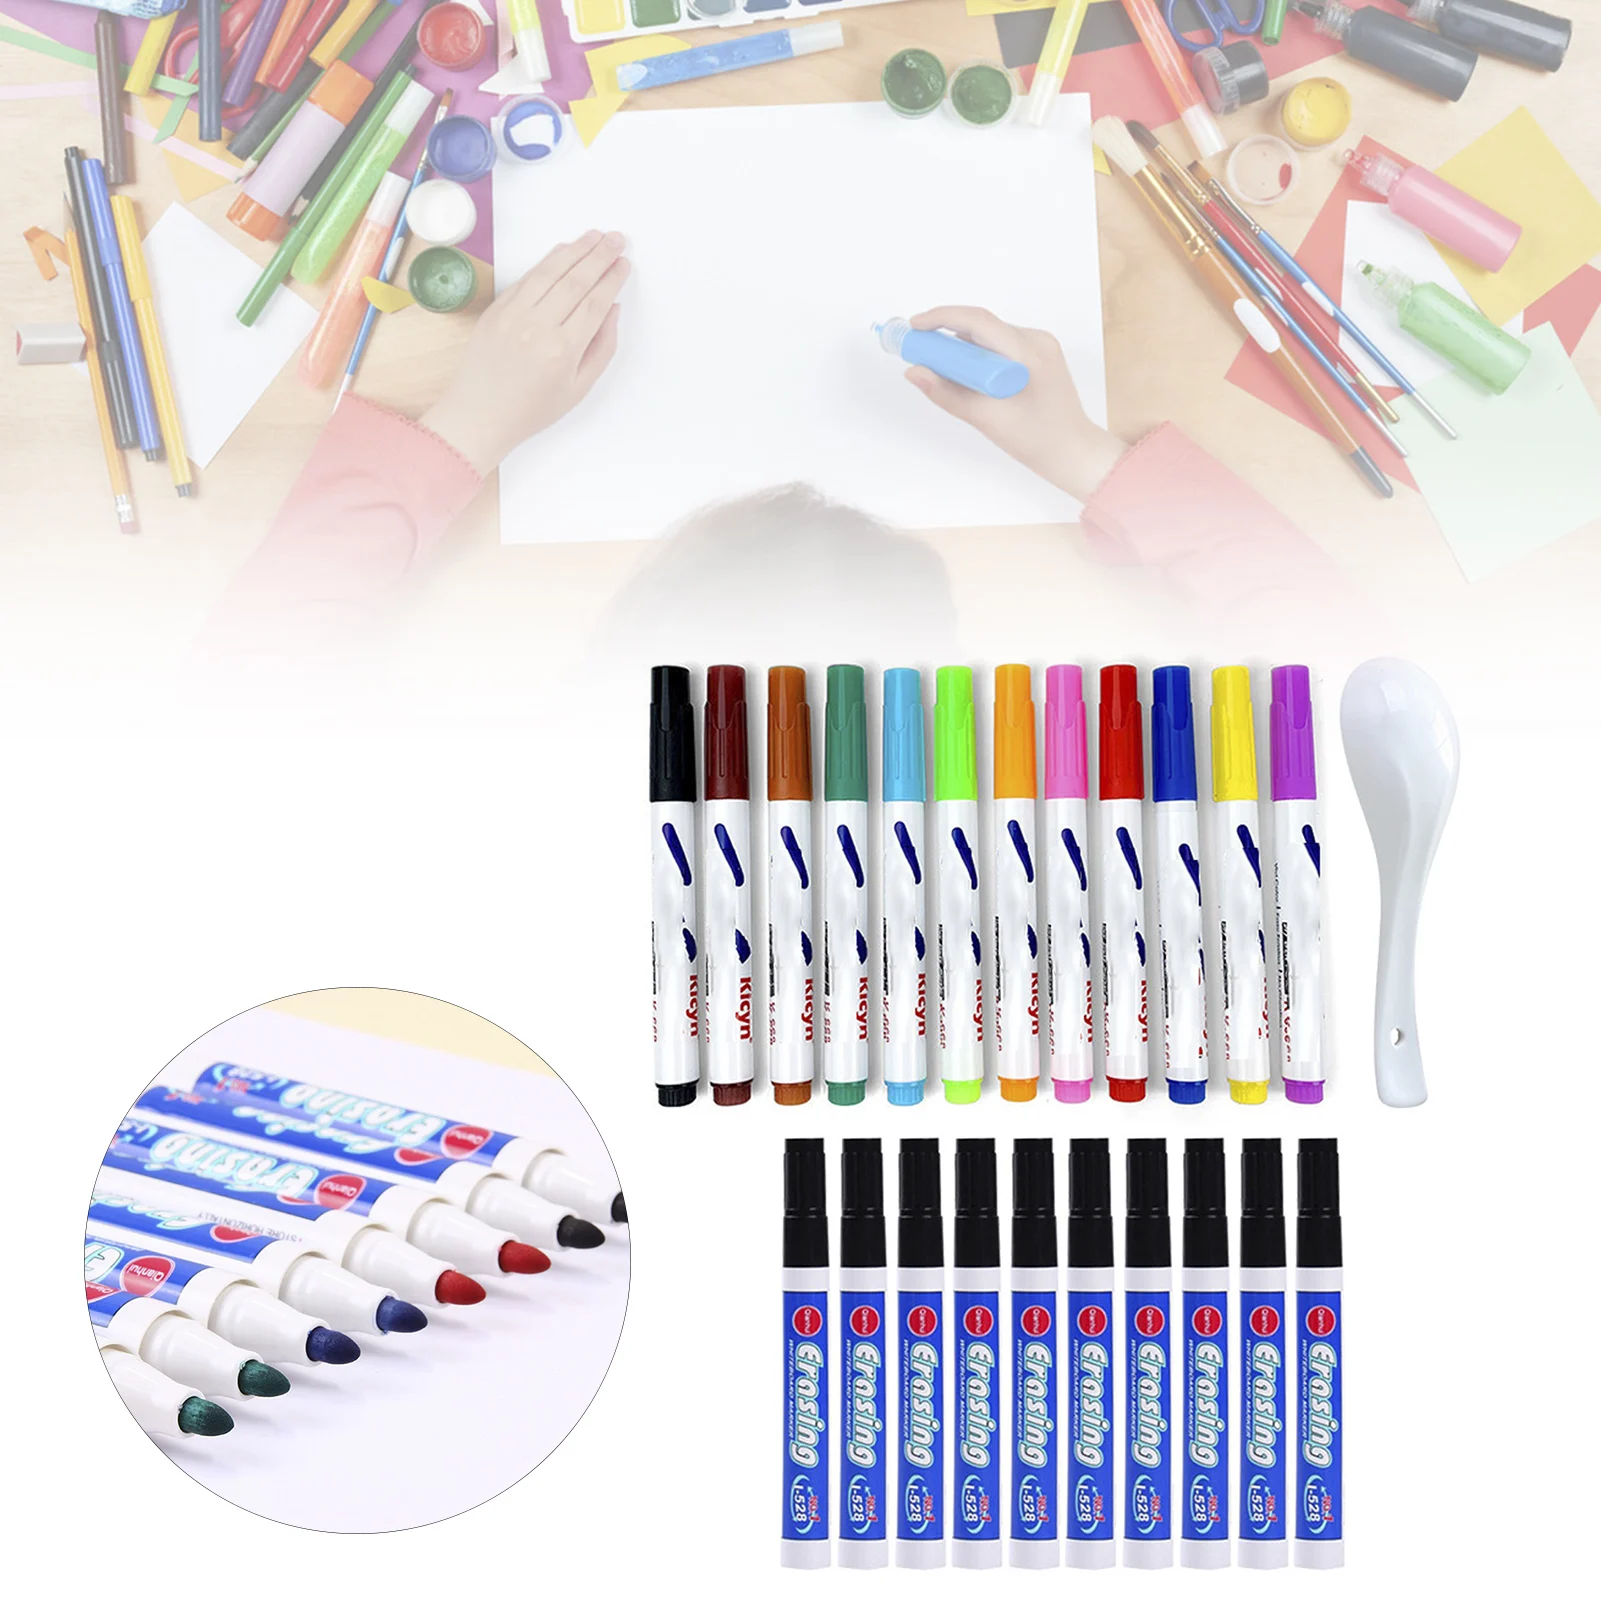 

12pcs Magical Water Painting Whiteboard Pen Non-toxic Erasable Color Marker Pen Water-Based Dry Erase Blackboard Pen For Kids